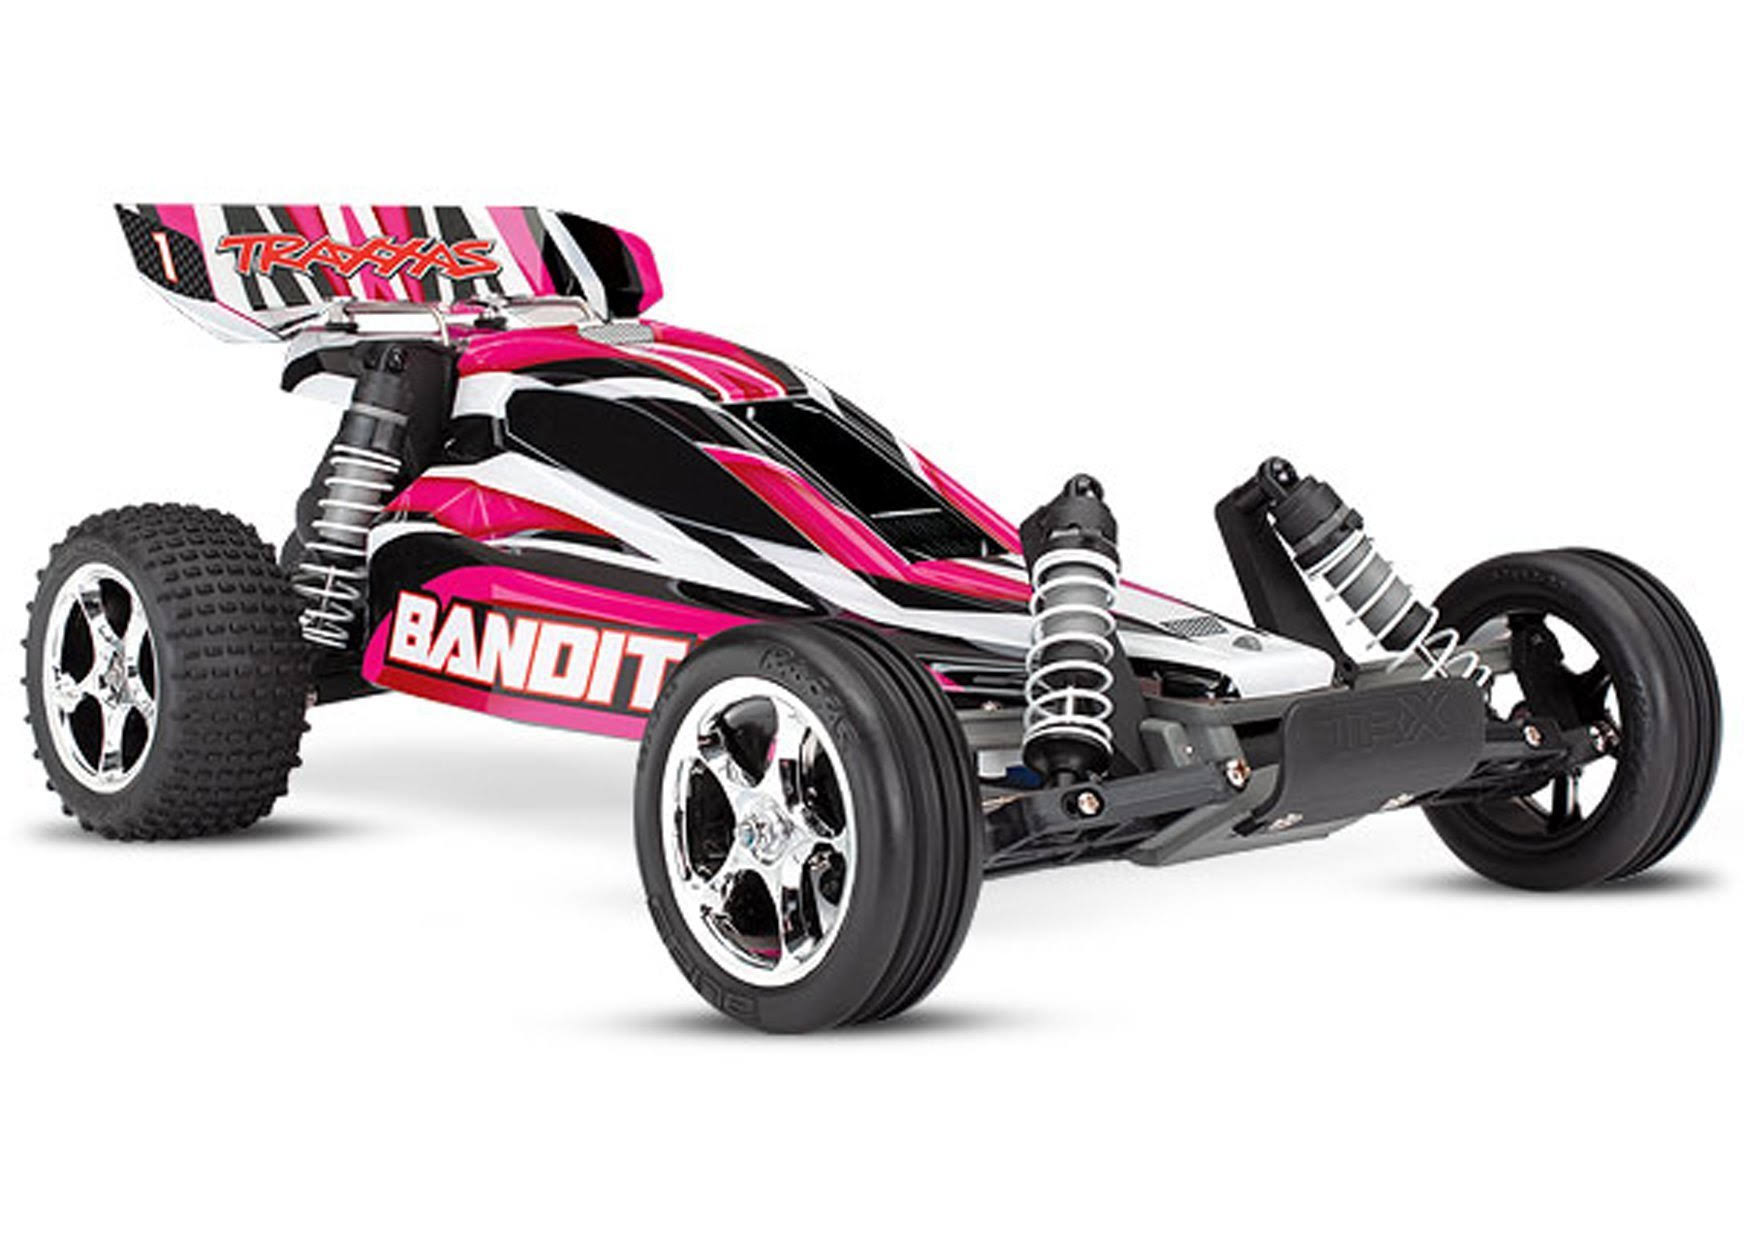 Traxxas Bandit: 1/10 Scale Off-Road Buggy - Pink